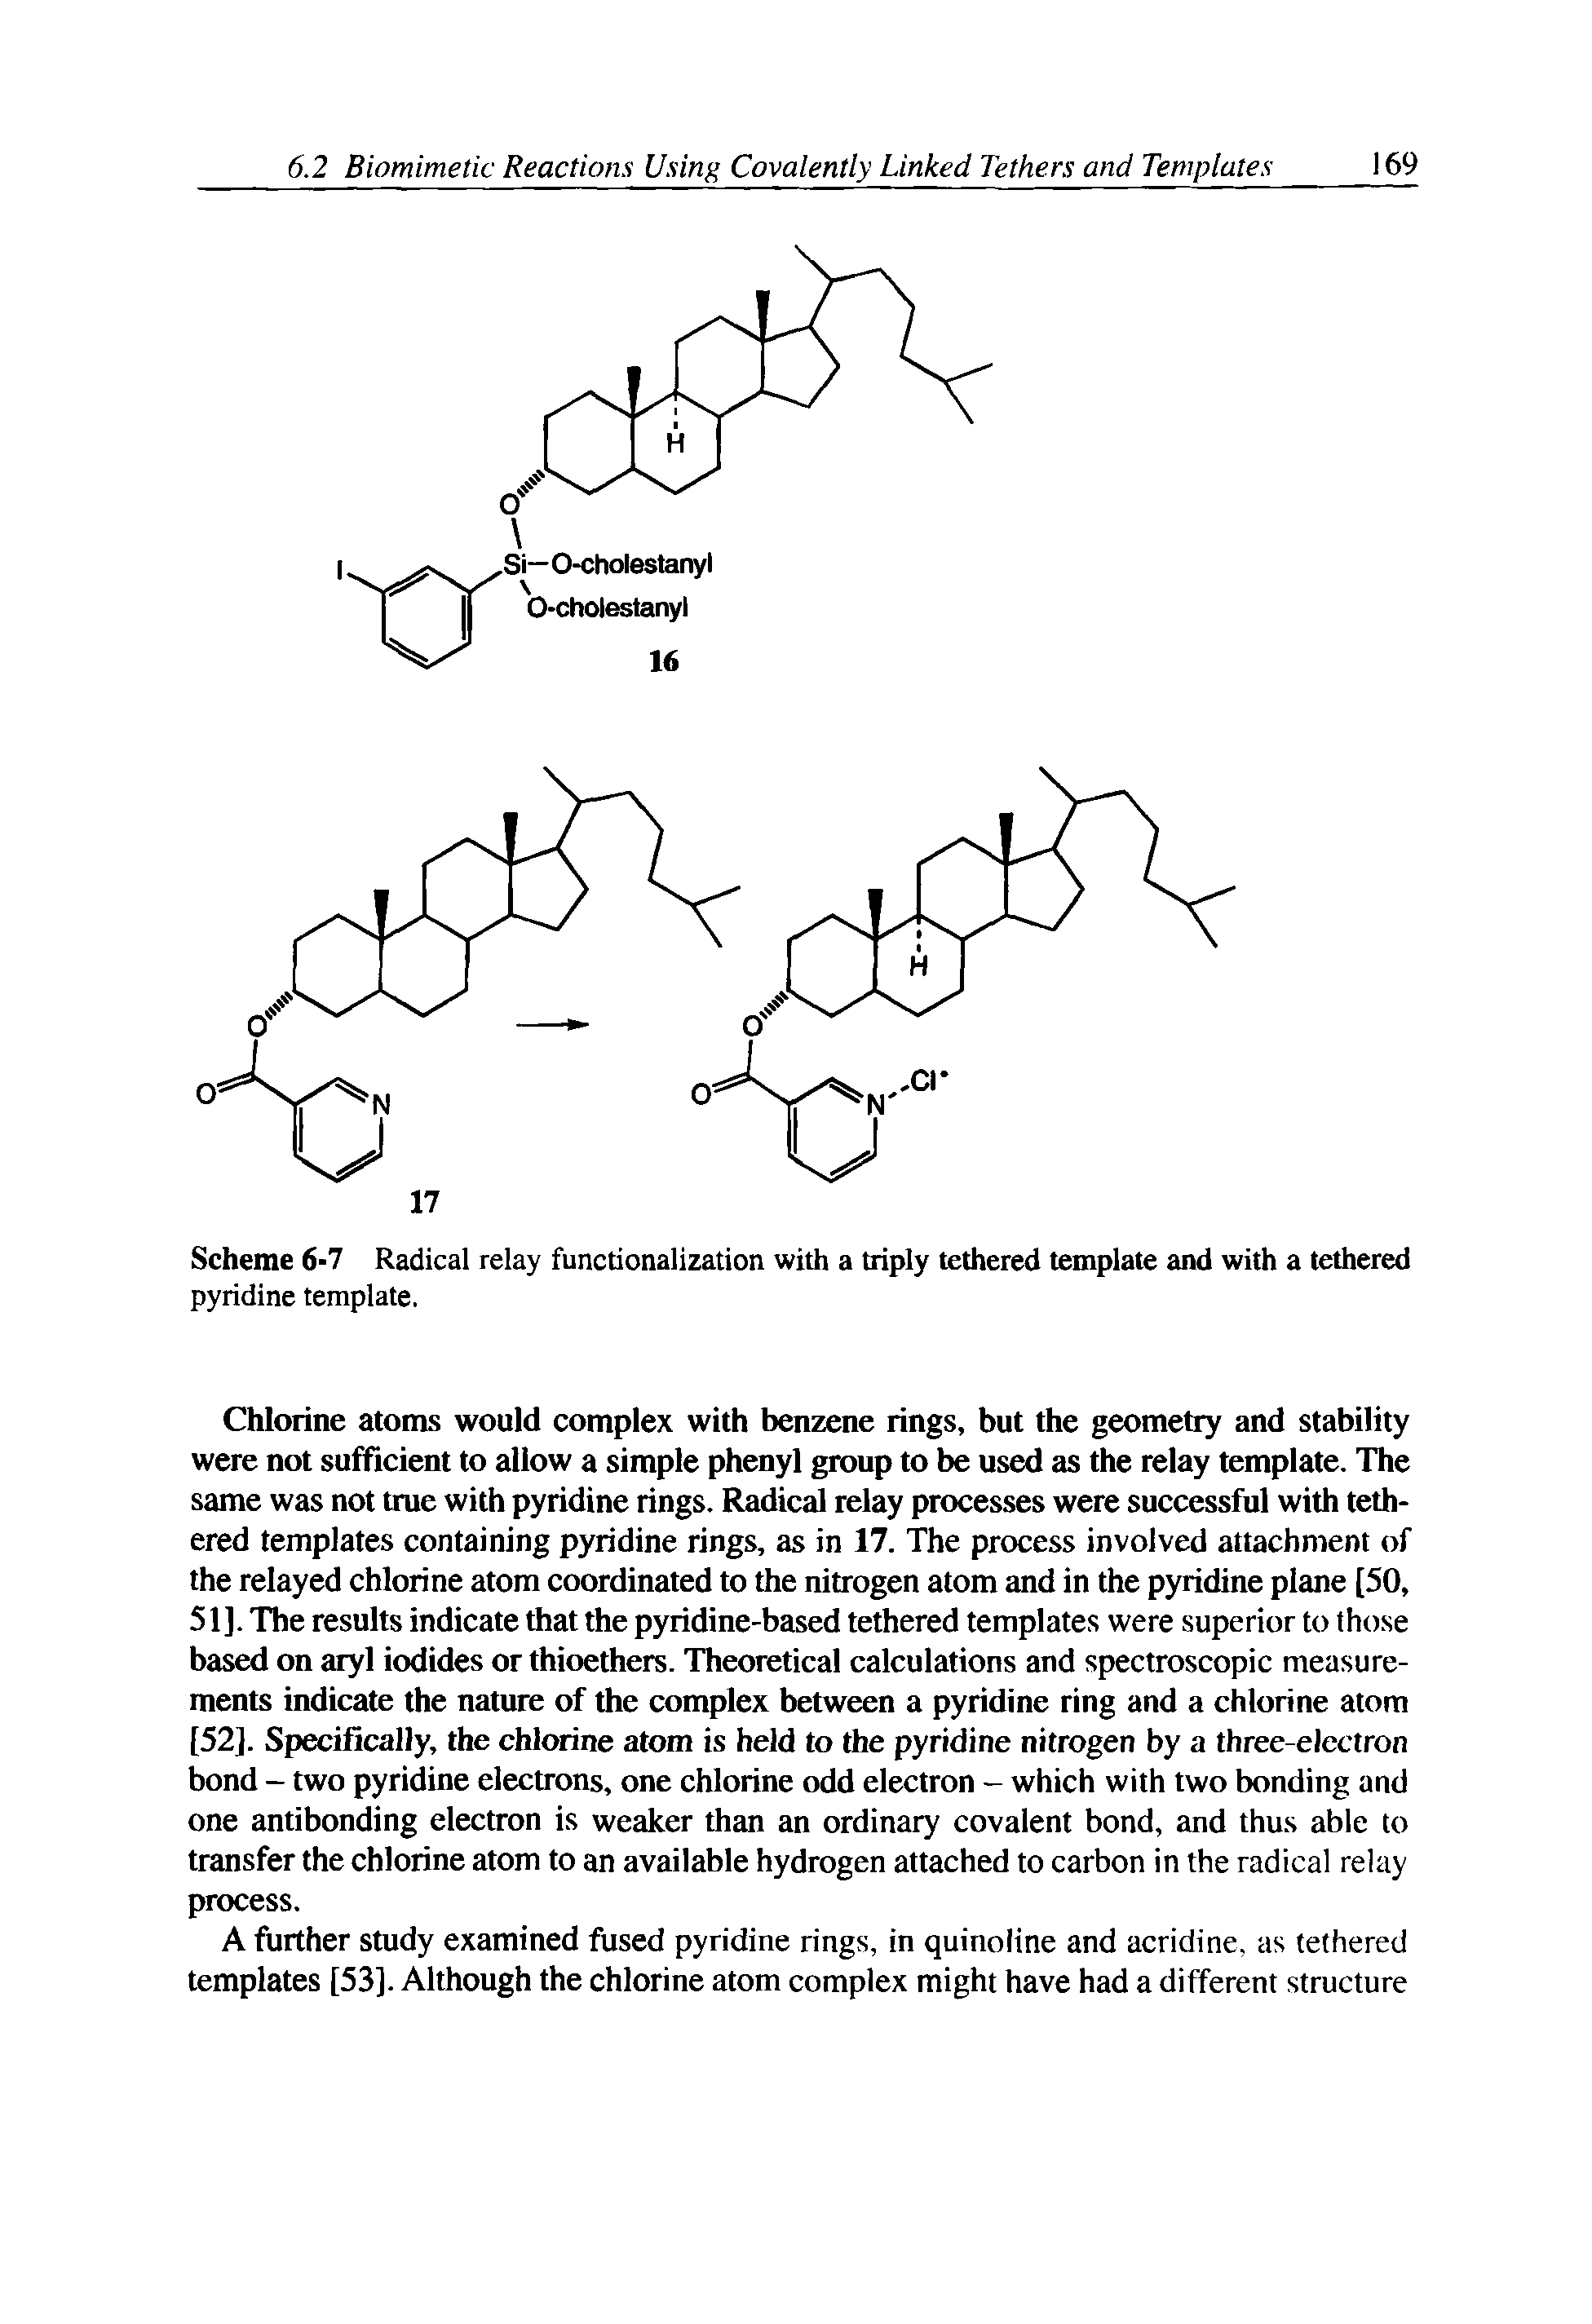 Scheme 6-7 Radical relay functionalization with a triply tethered template and with a tethered pyridine template.